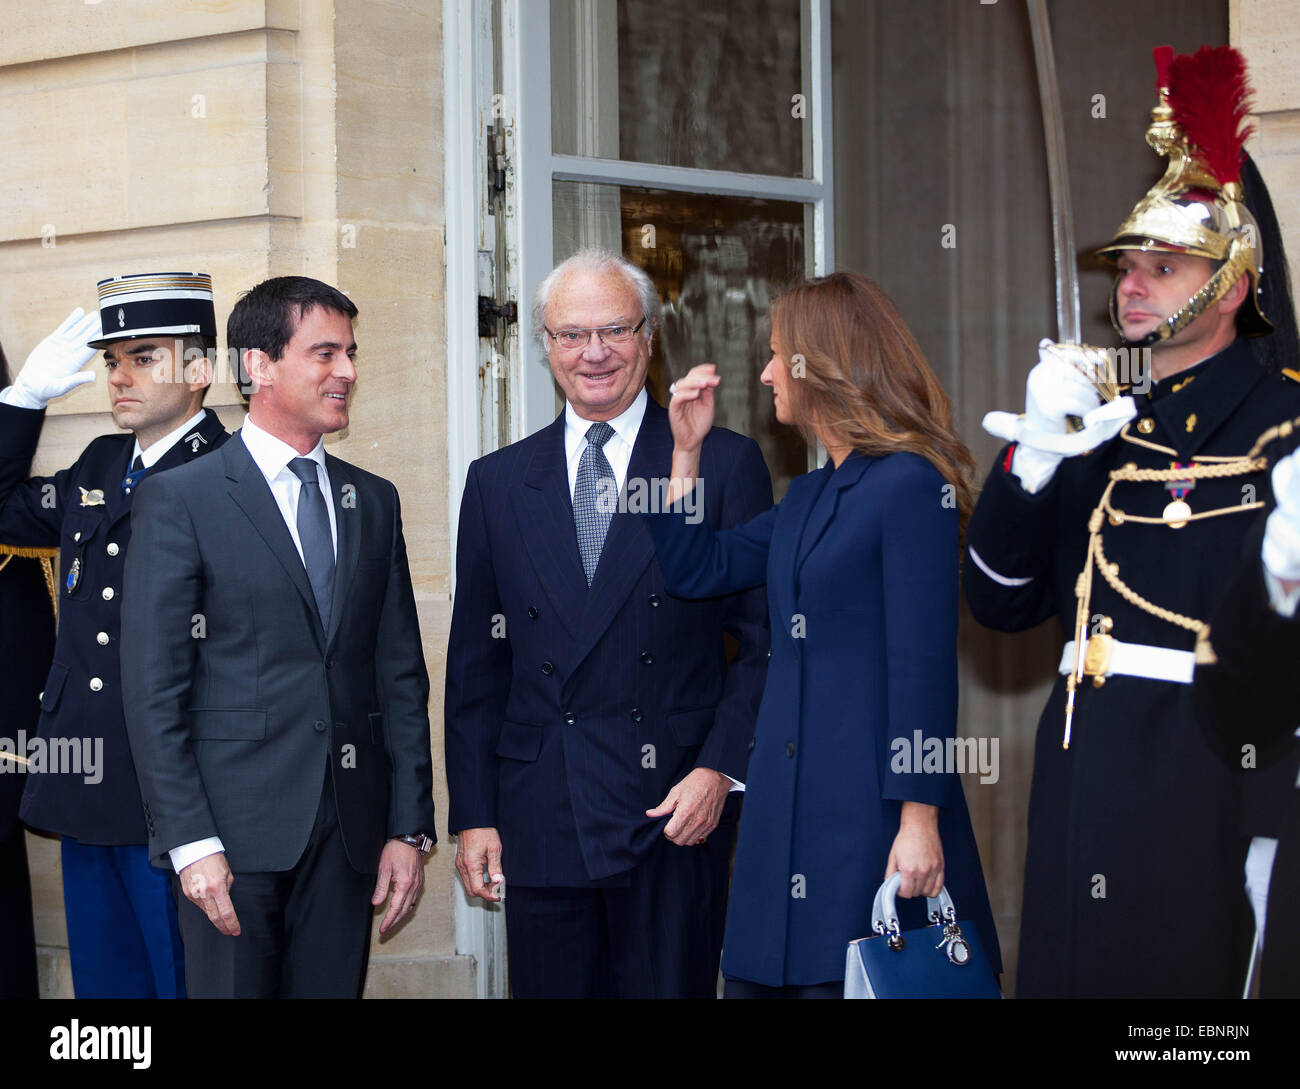 Paris, France. 3rd Dec, 2014. French PM Manuel Valls and his wife Anne Gravoin welcome Sweden's King Carl XVI Gustaf at the Hotel Matignon in Paris, France, 3 December 2014. The King and Queen are in France for an three day state visit. PHOTO: RPE/Albert Nieboer// NO WIRE SERVICE/dpa/Alamy Live News Stock Photo